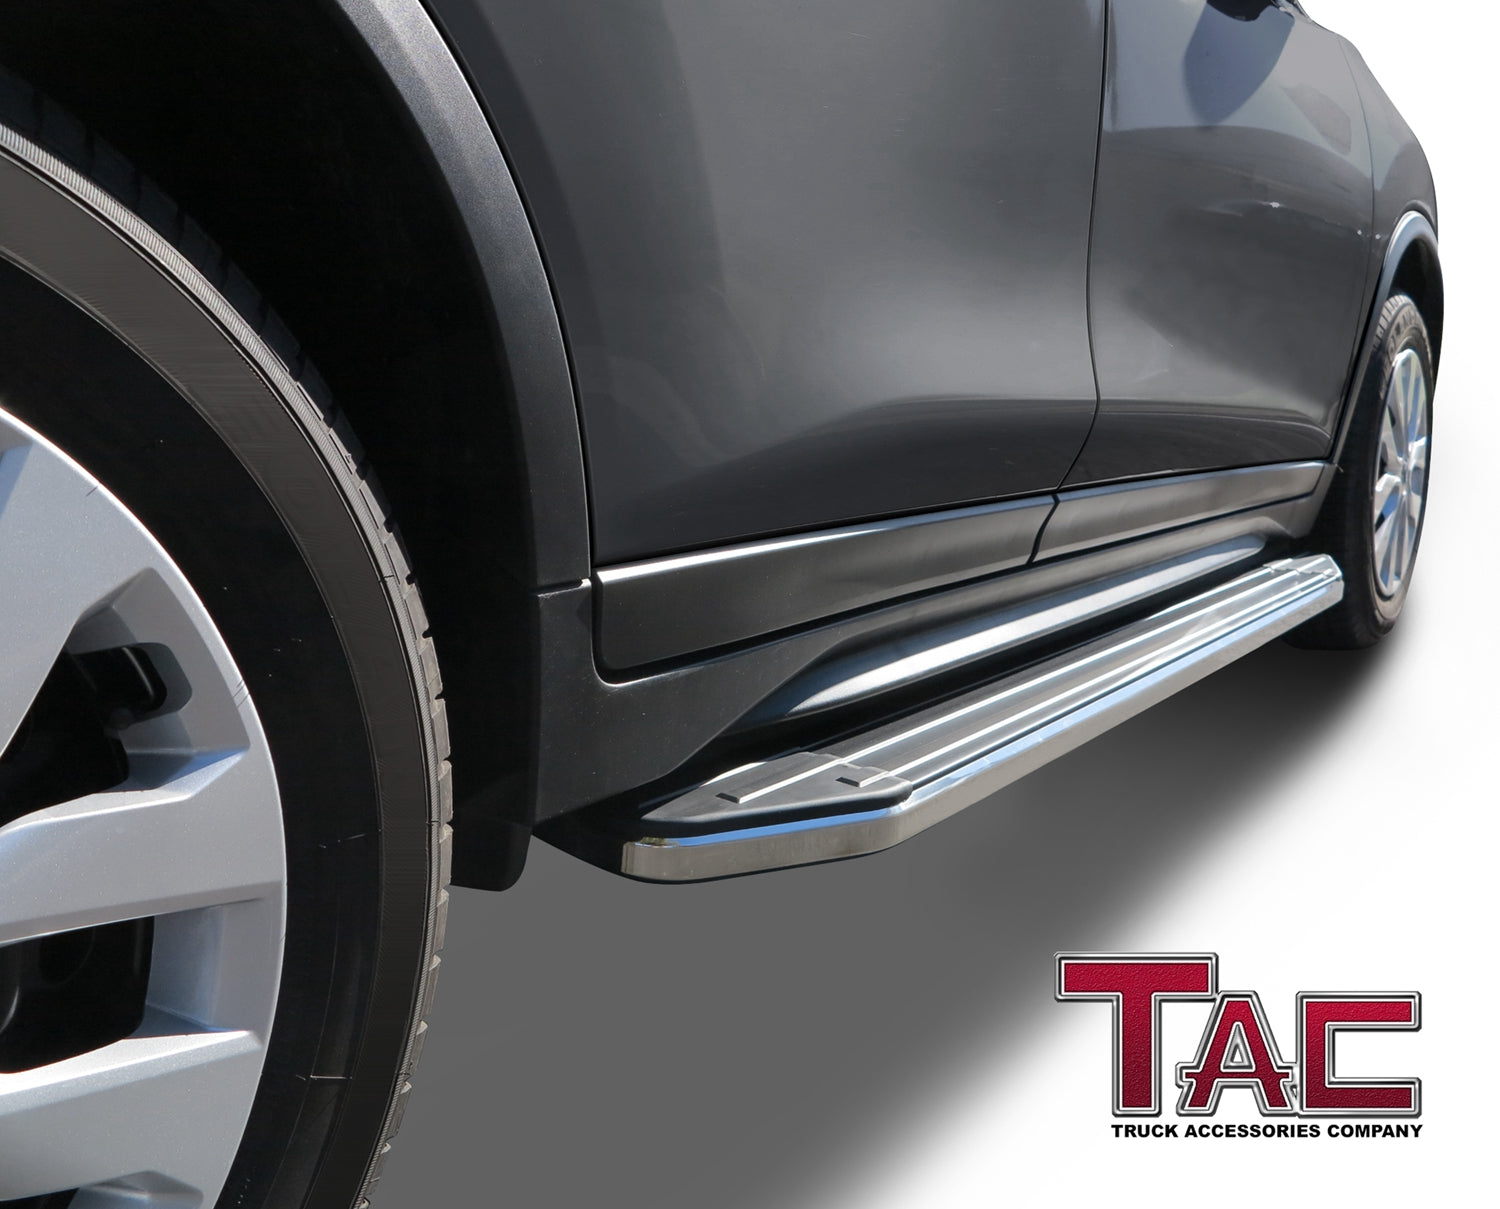 TAC Running Boards Fit 2010-2015 Lexus RX350 (Requires Drilling & Cutting Plastic Cover) Aluminum Black Side Steps Nerf Bars Step Rails Running Boards Rock Panel Off Road Exterior Accessories 2 Pieces - 0